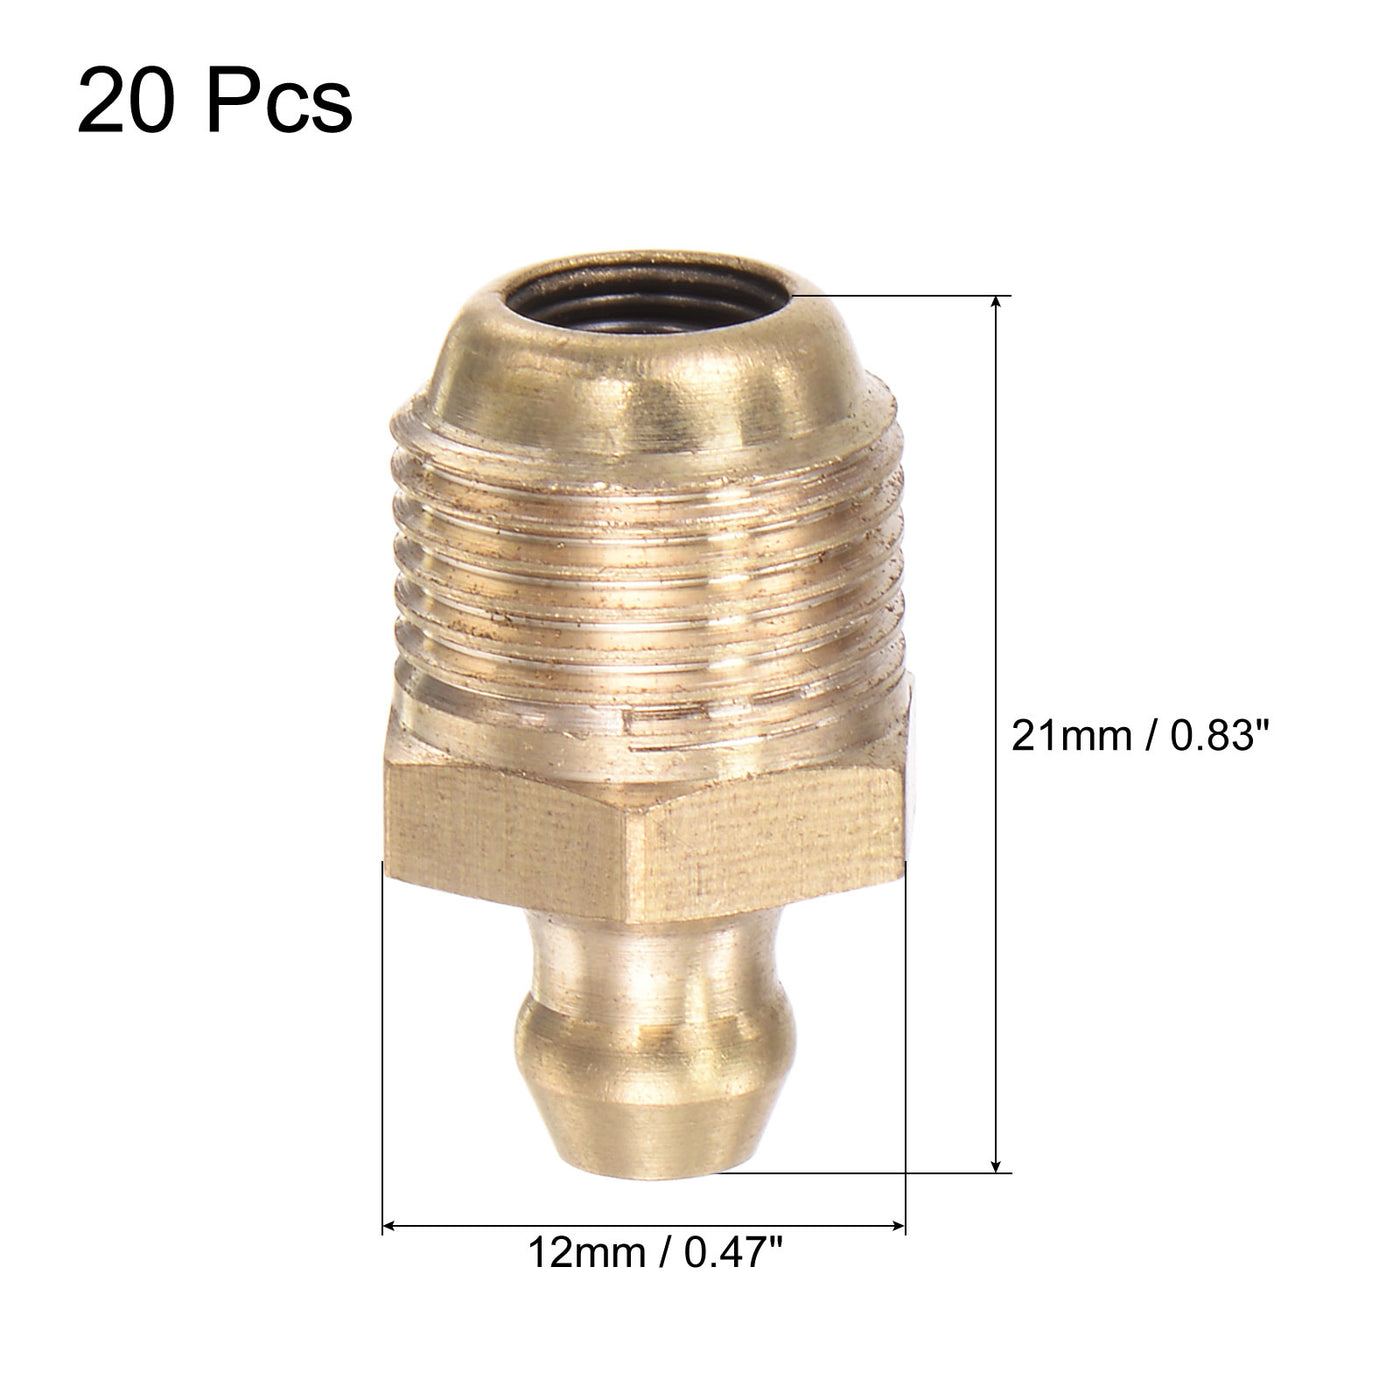 Uxcell Uxcell Brass Straight Hydraulic Grease Fitting M12 x 1mm Thread, 20Pcs